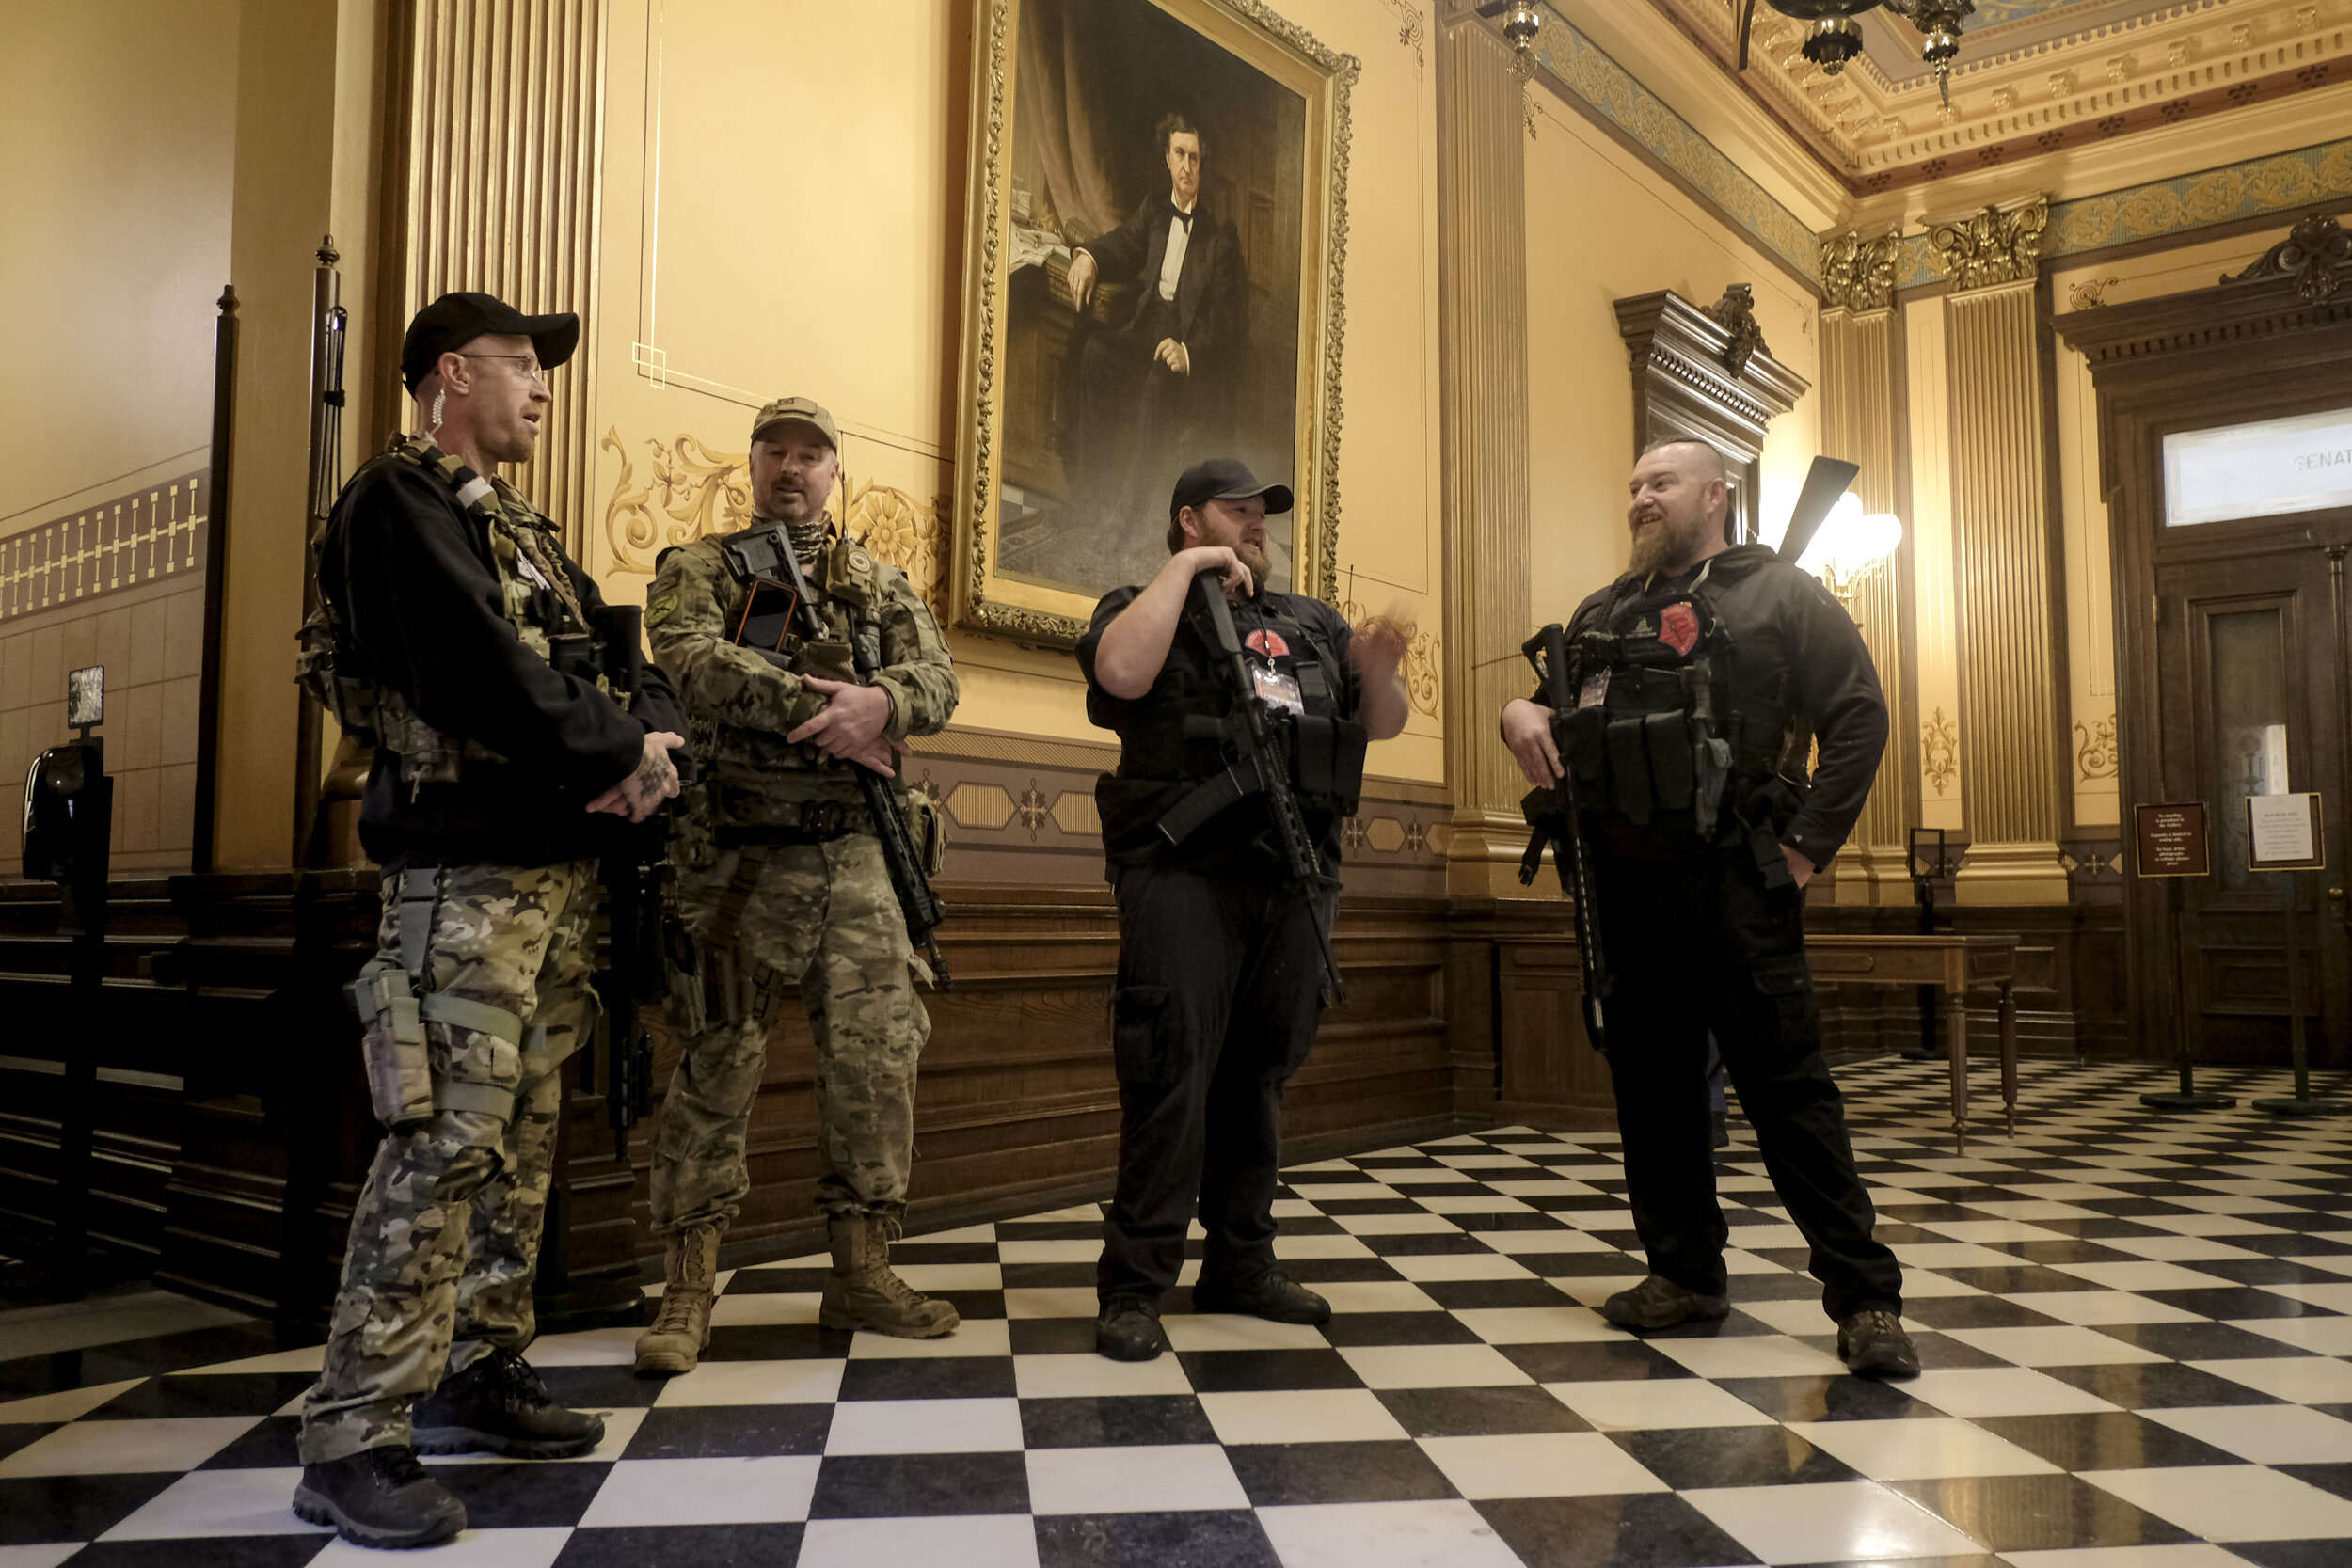  Members of an unnamed Michigan Militia group talk amongst themselves outside the Senate Chamber as they wait for the Senate Session to begin at the Michigan Capitol Building on Thursday, April 30 in Lansing, Michigan. A large number of protesters, s